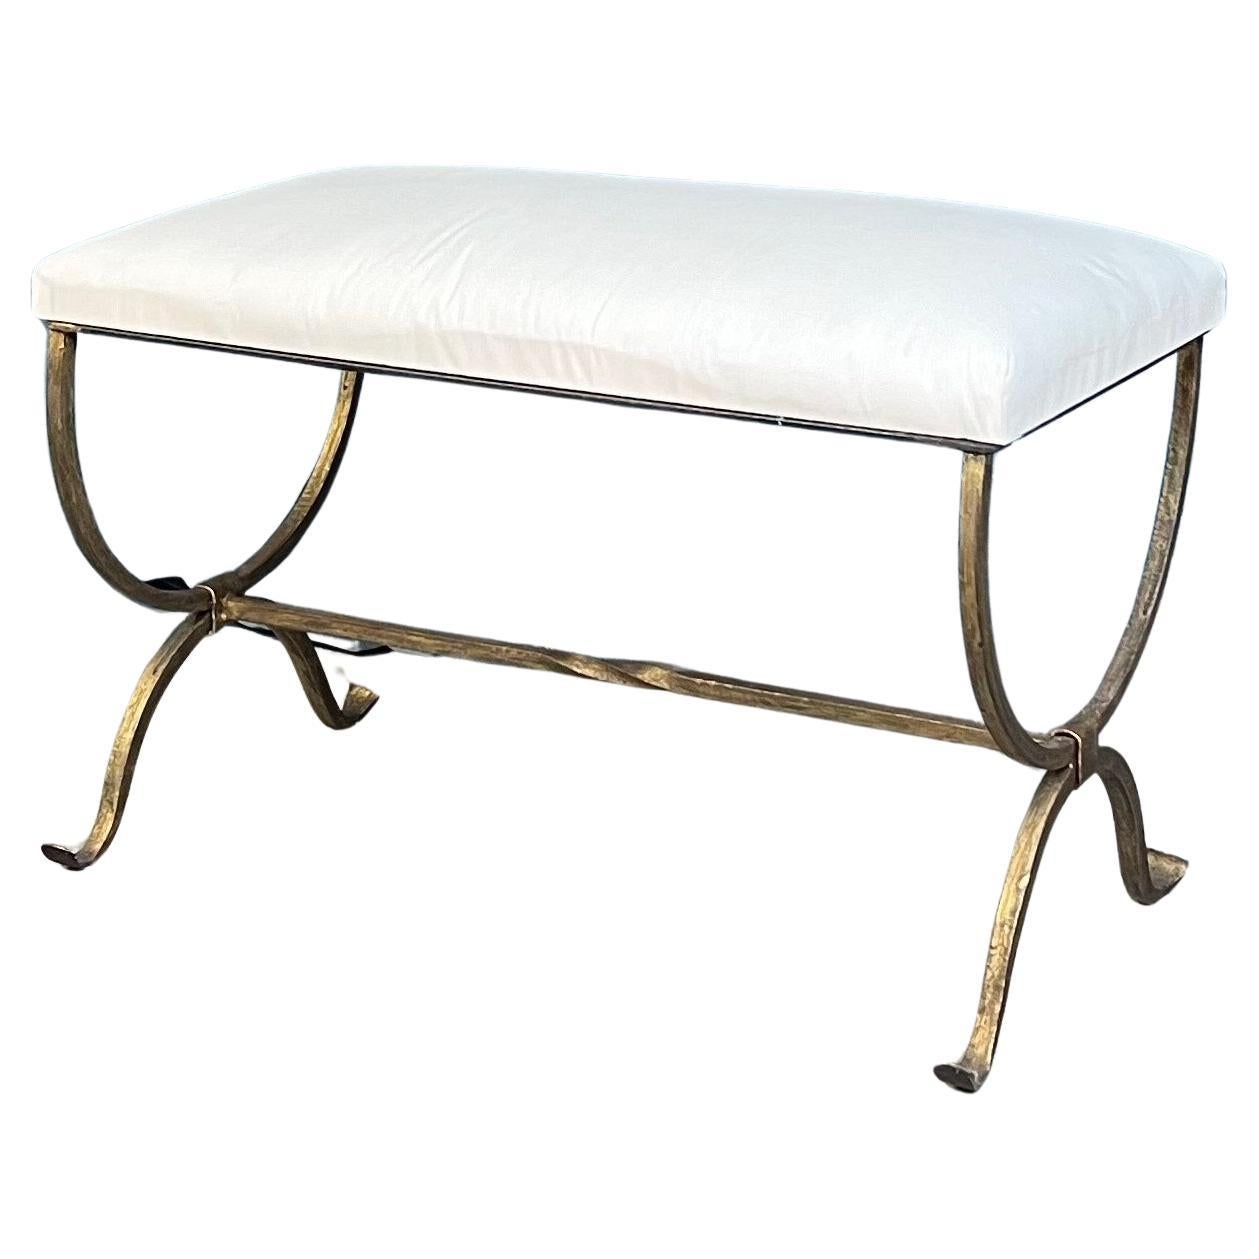 Spanish Iron Bench in Muslin For Sale